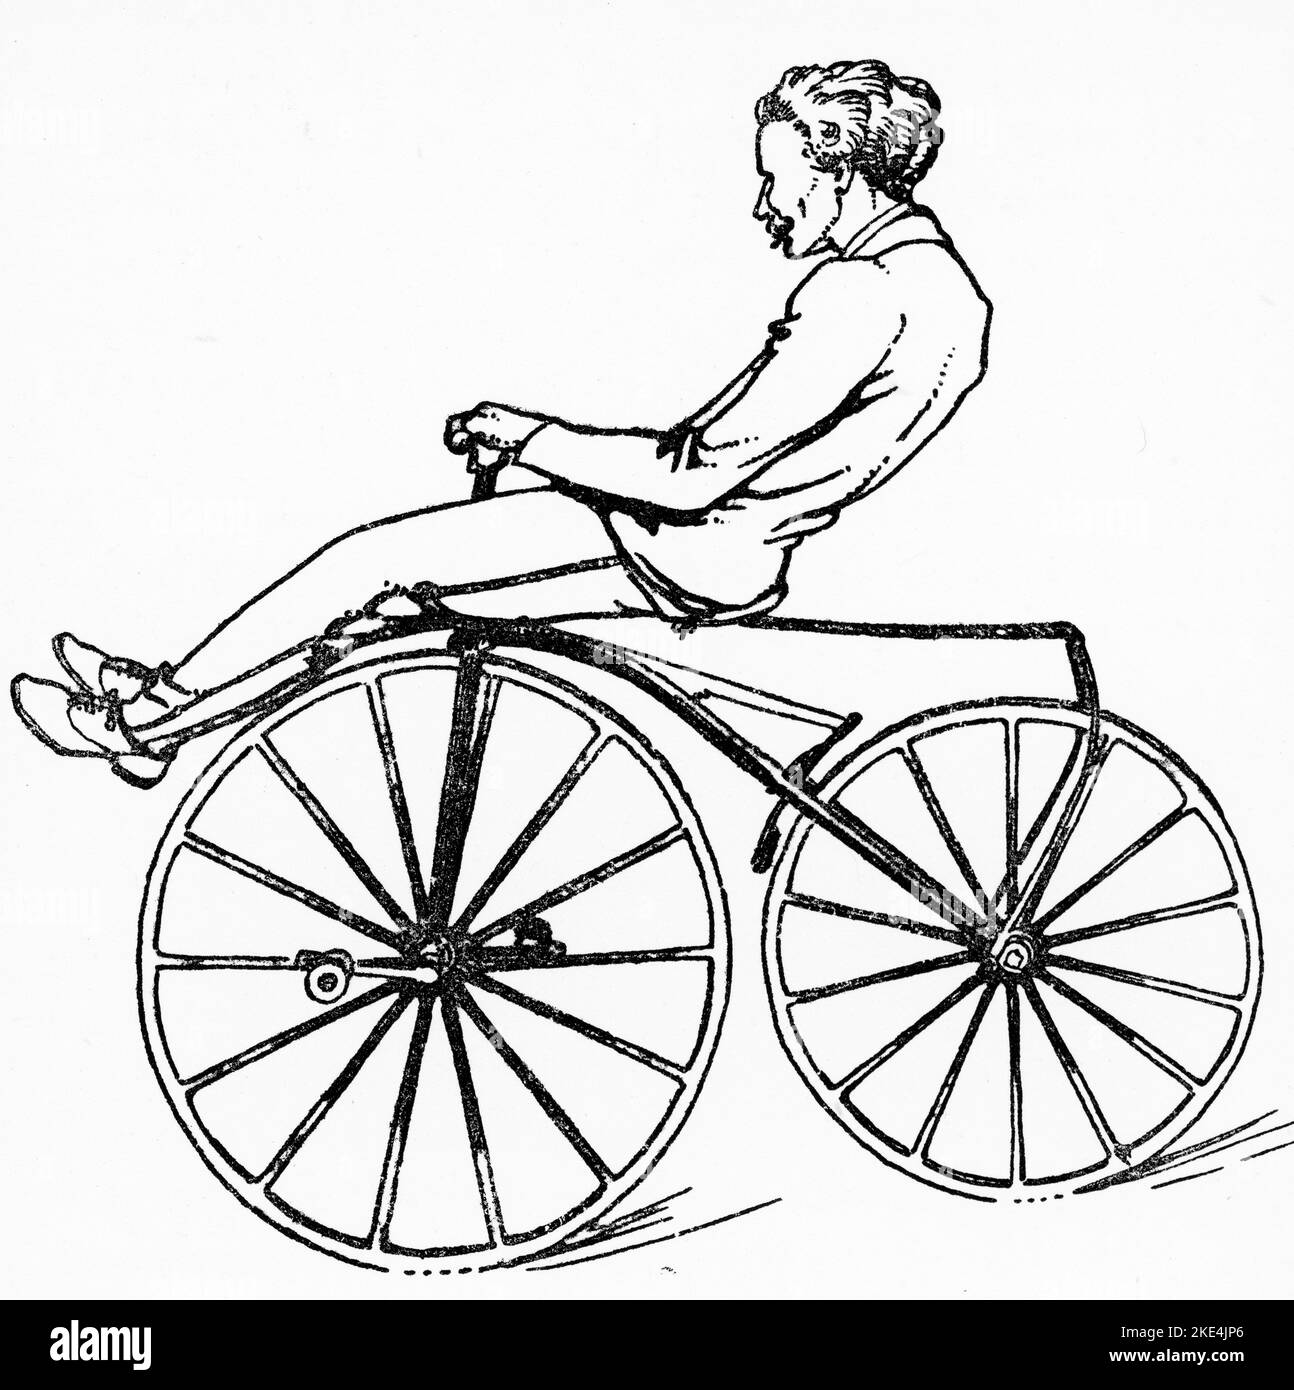 A Boneshaker of 1869 (1942). A Boneshaker (or bone-shaker) is a name used from about 1869 up to the present time to refer to the first type of true bicycle with pedals, which was called velocipede by its manufacturers. 'Boneshaker' refers to the extremely uncomfortable ride, which was caused by the stiff wrought-iron frame and wooden wheels surrounded by tires made of iron. Stock Photo